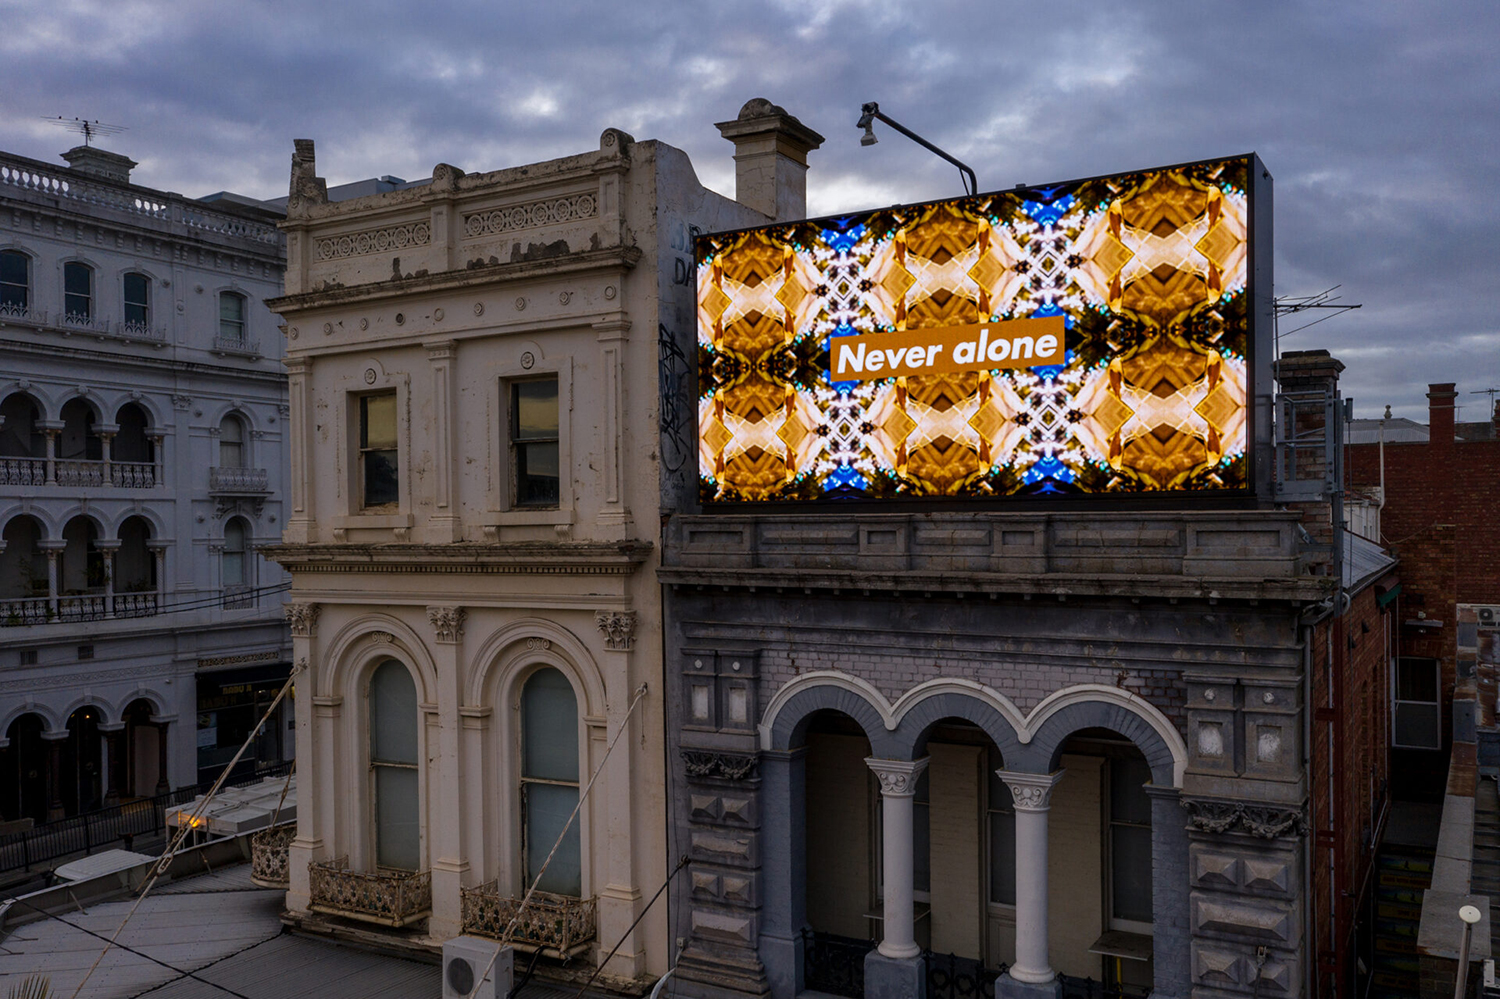 Kent Morris, Never alone 2020, digital billboard, installation image, intersection of Fitzroy Street, Canterbury Road and Grey Street, St Kilda, Melbourne. Commissioned by ACCA. Courtesy the artist. Photograph: Andrew Curtis